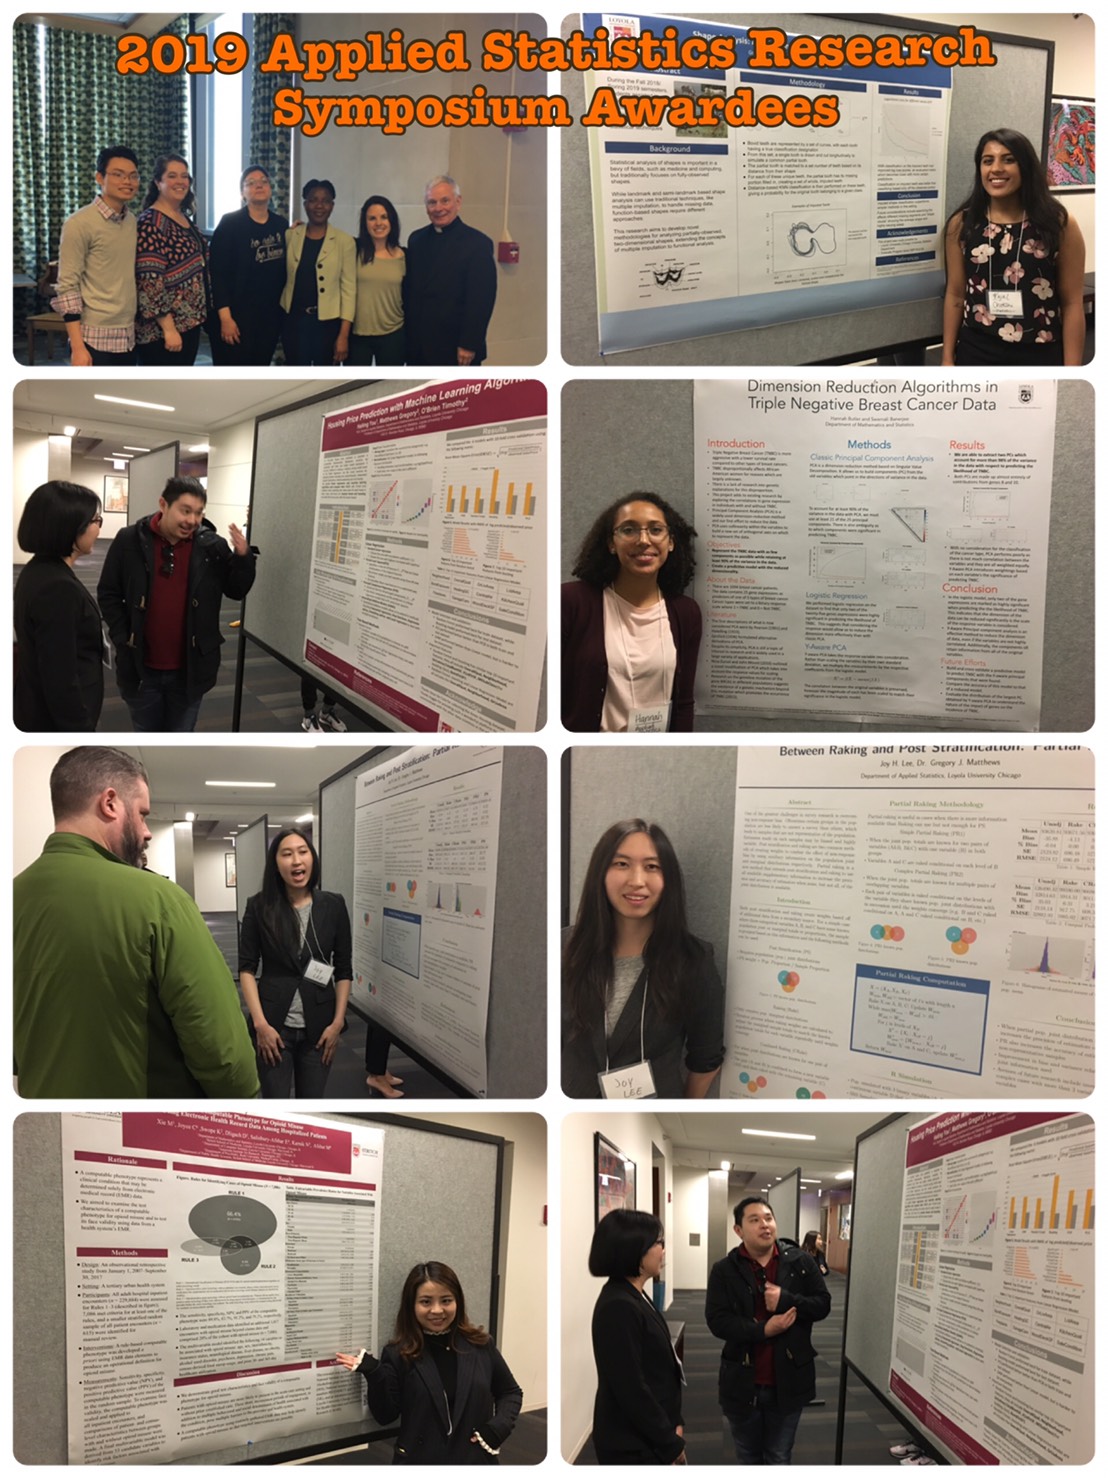 This image is a collage of eight photos. In each photo, a student presenter is standing in front of a poster that displays their research.